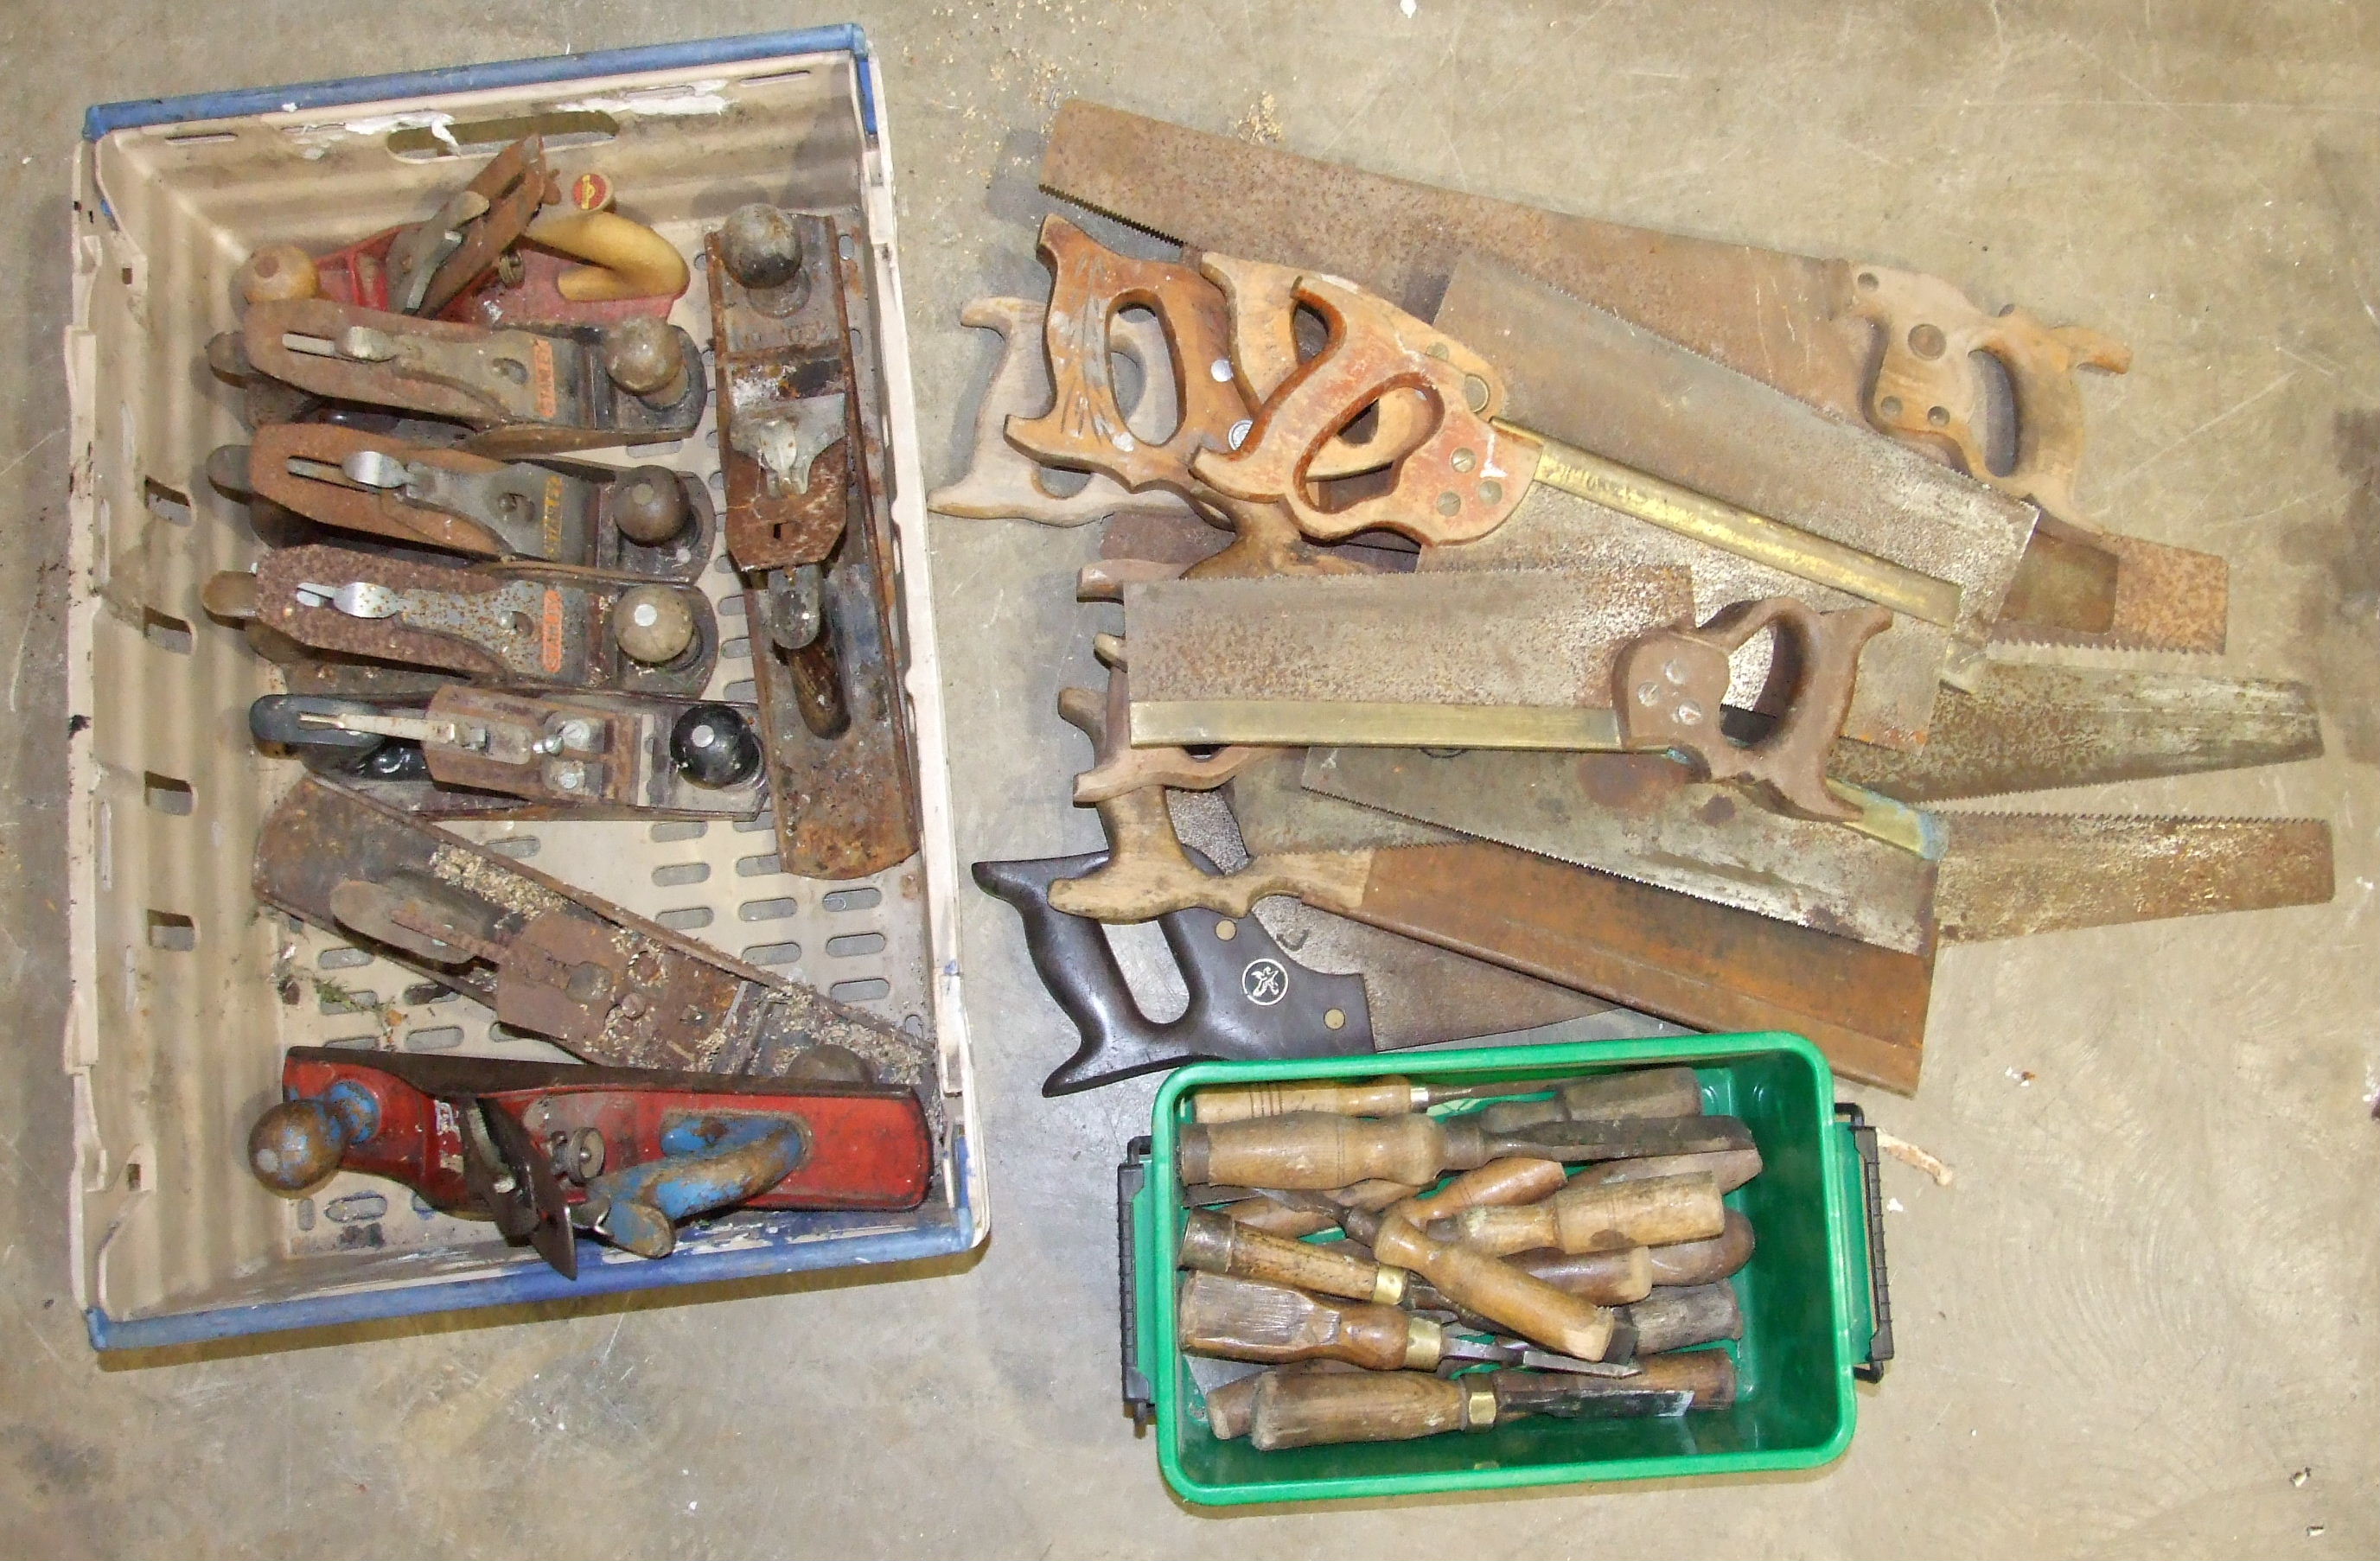 A collection of Stanley and other metal planes, vintage chisels and hand saws.